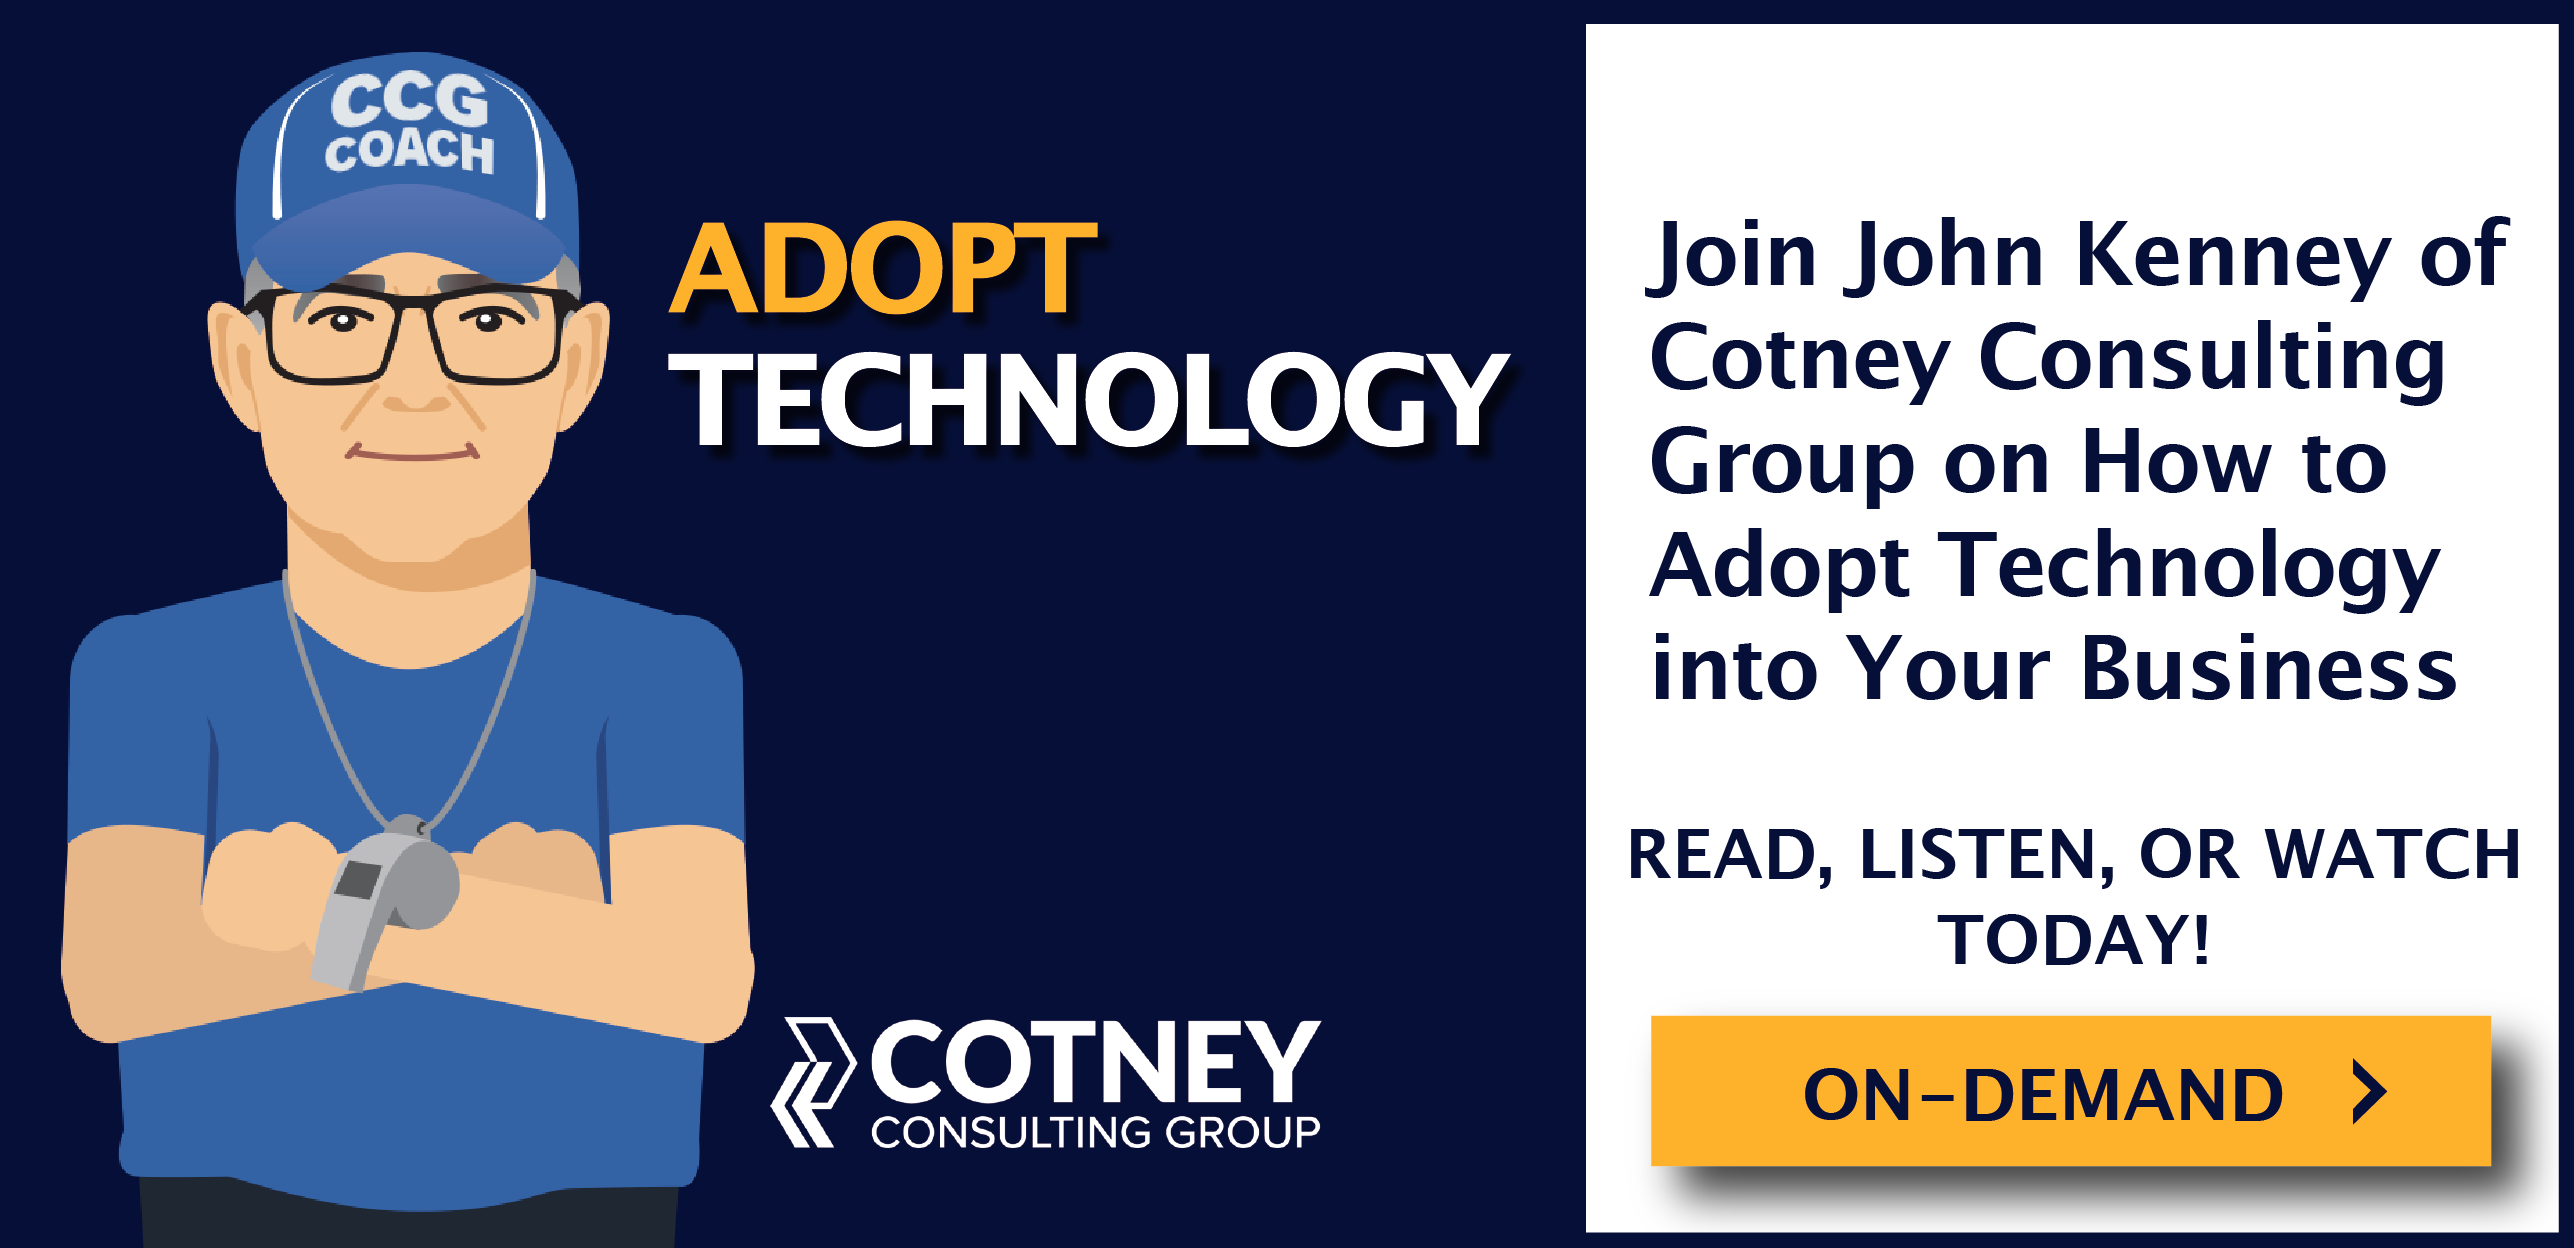 Cotney Consulting Group Adopt Technology